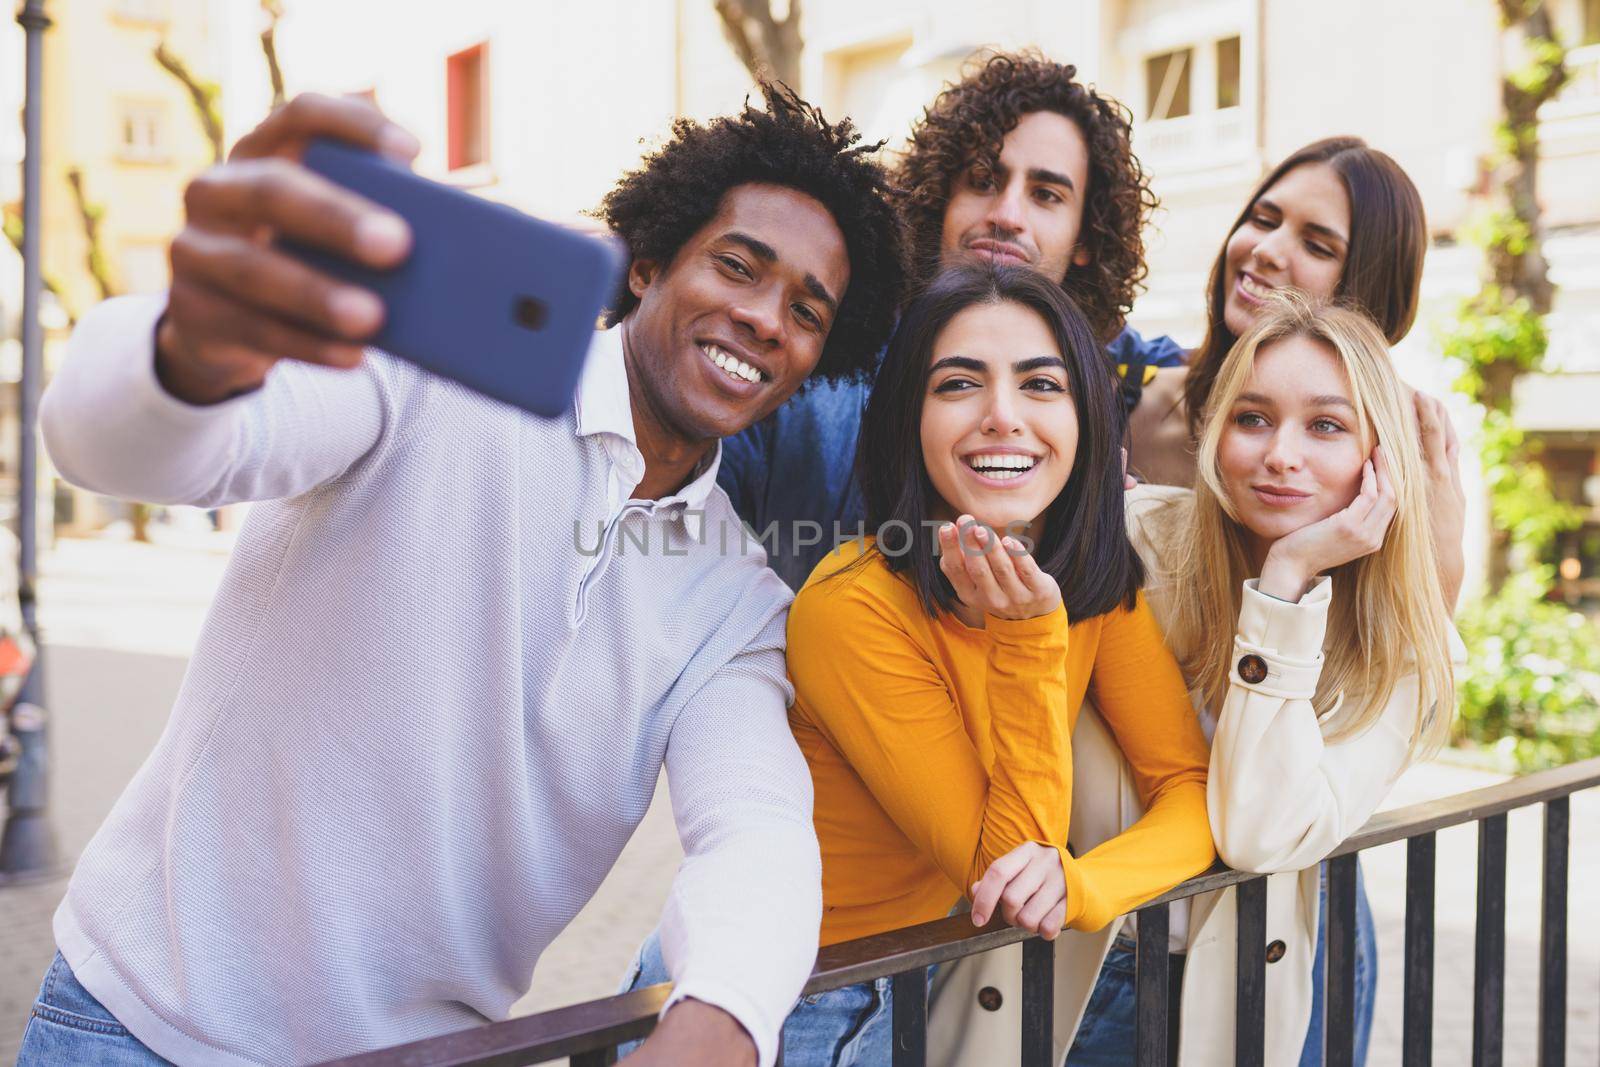 Black man with afro hair taking a smartphone selfie with his multi-ethnic group of friends outdoors.